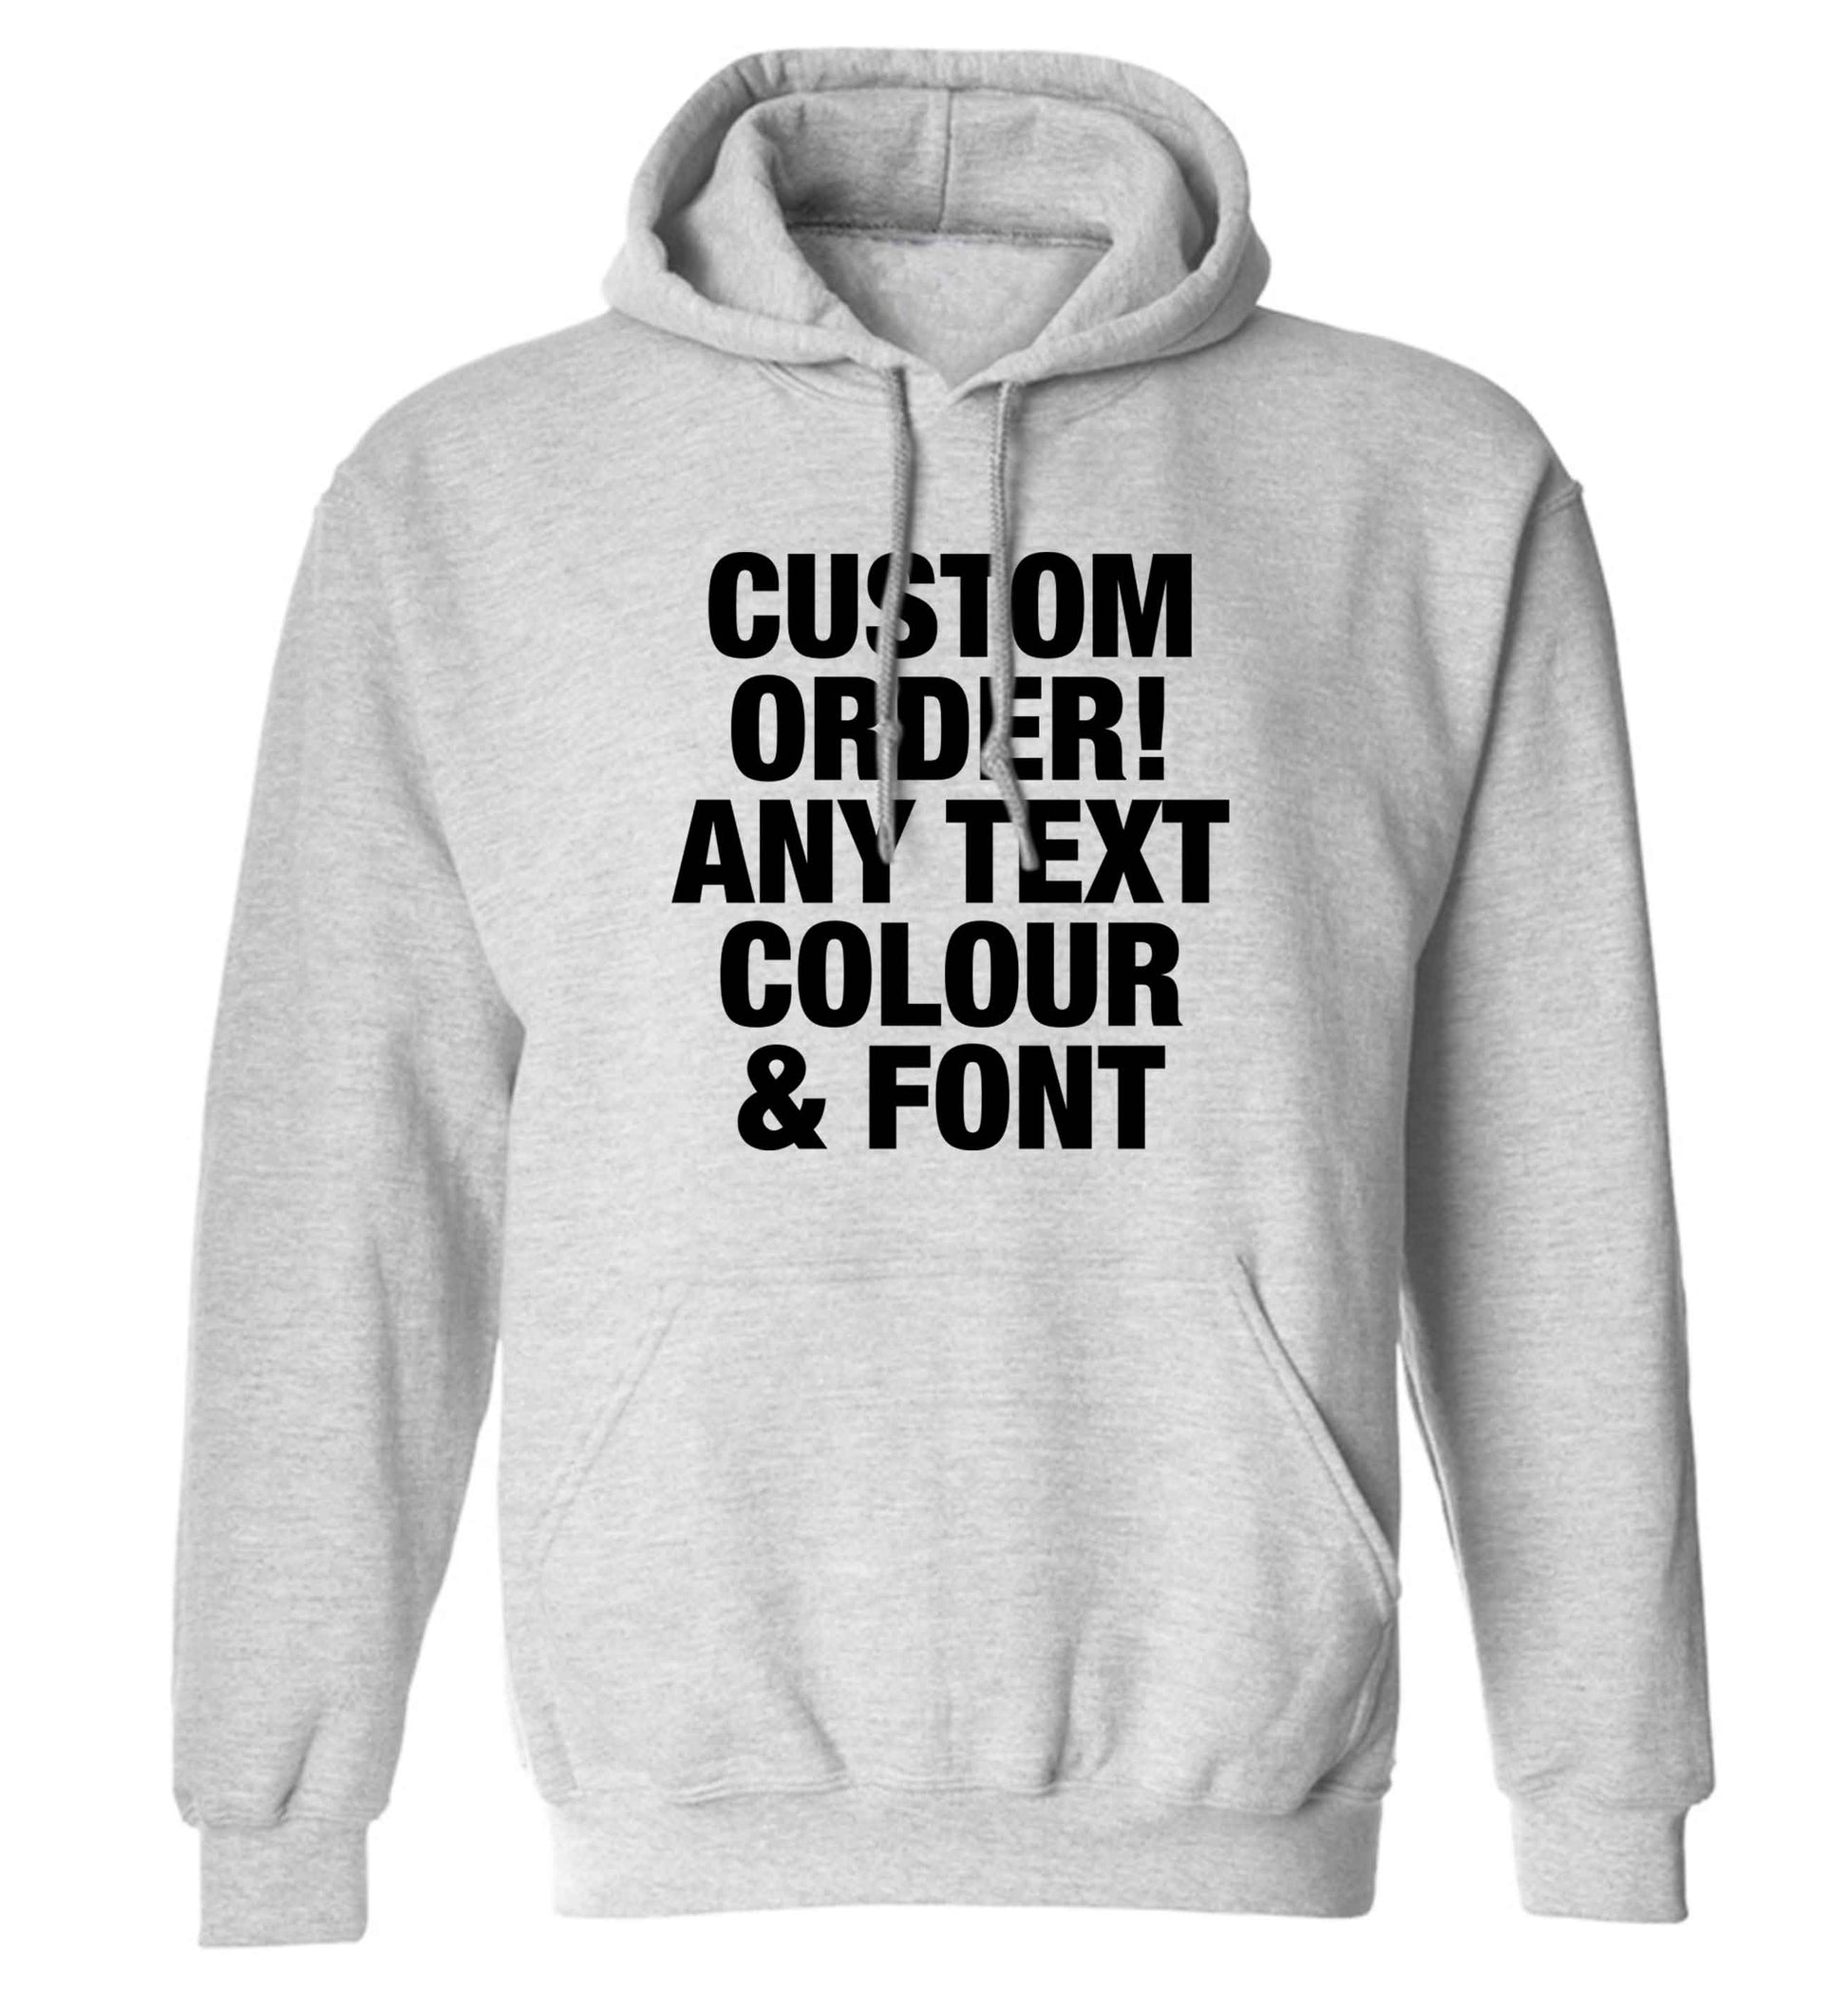 Custom order any text colour and font adults unisex grey hoodie 2XL